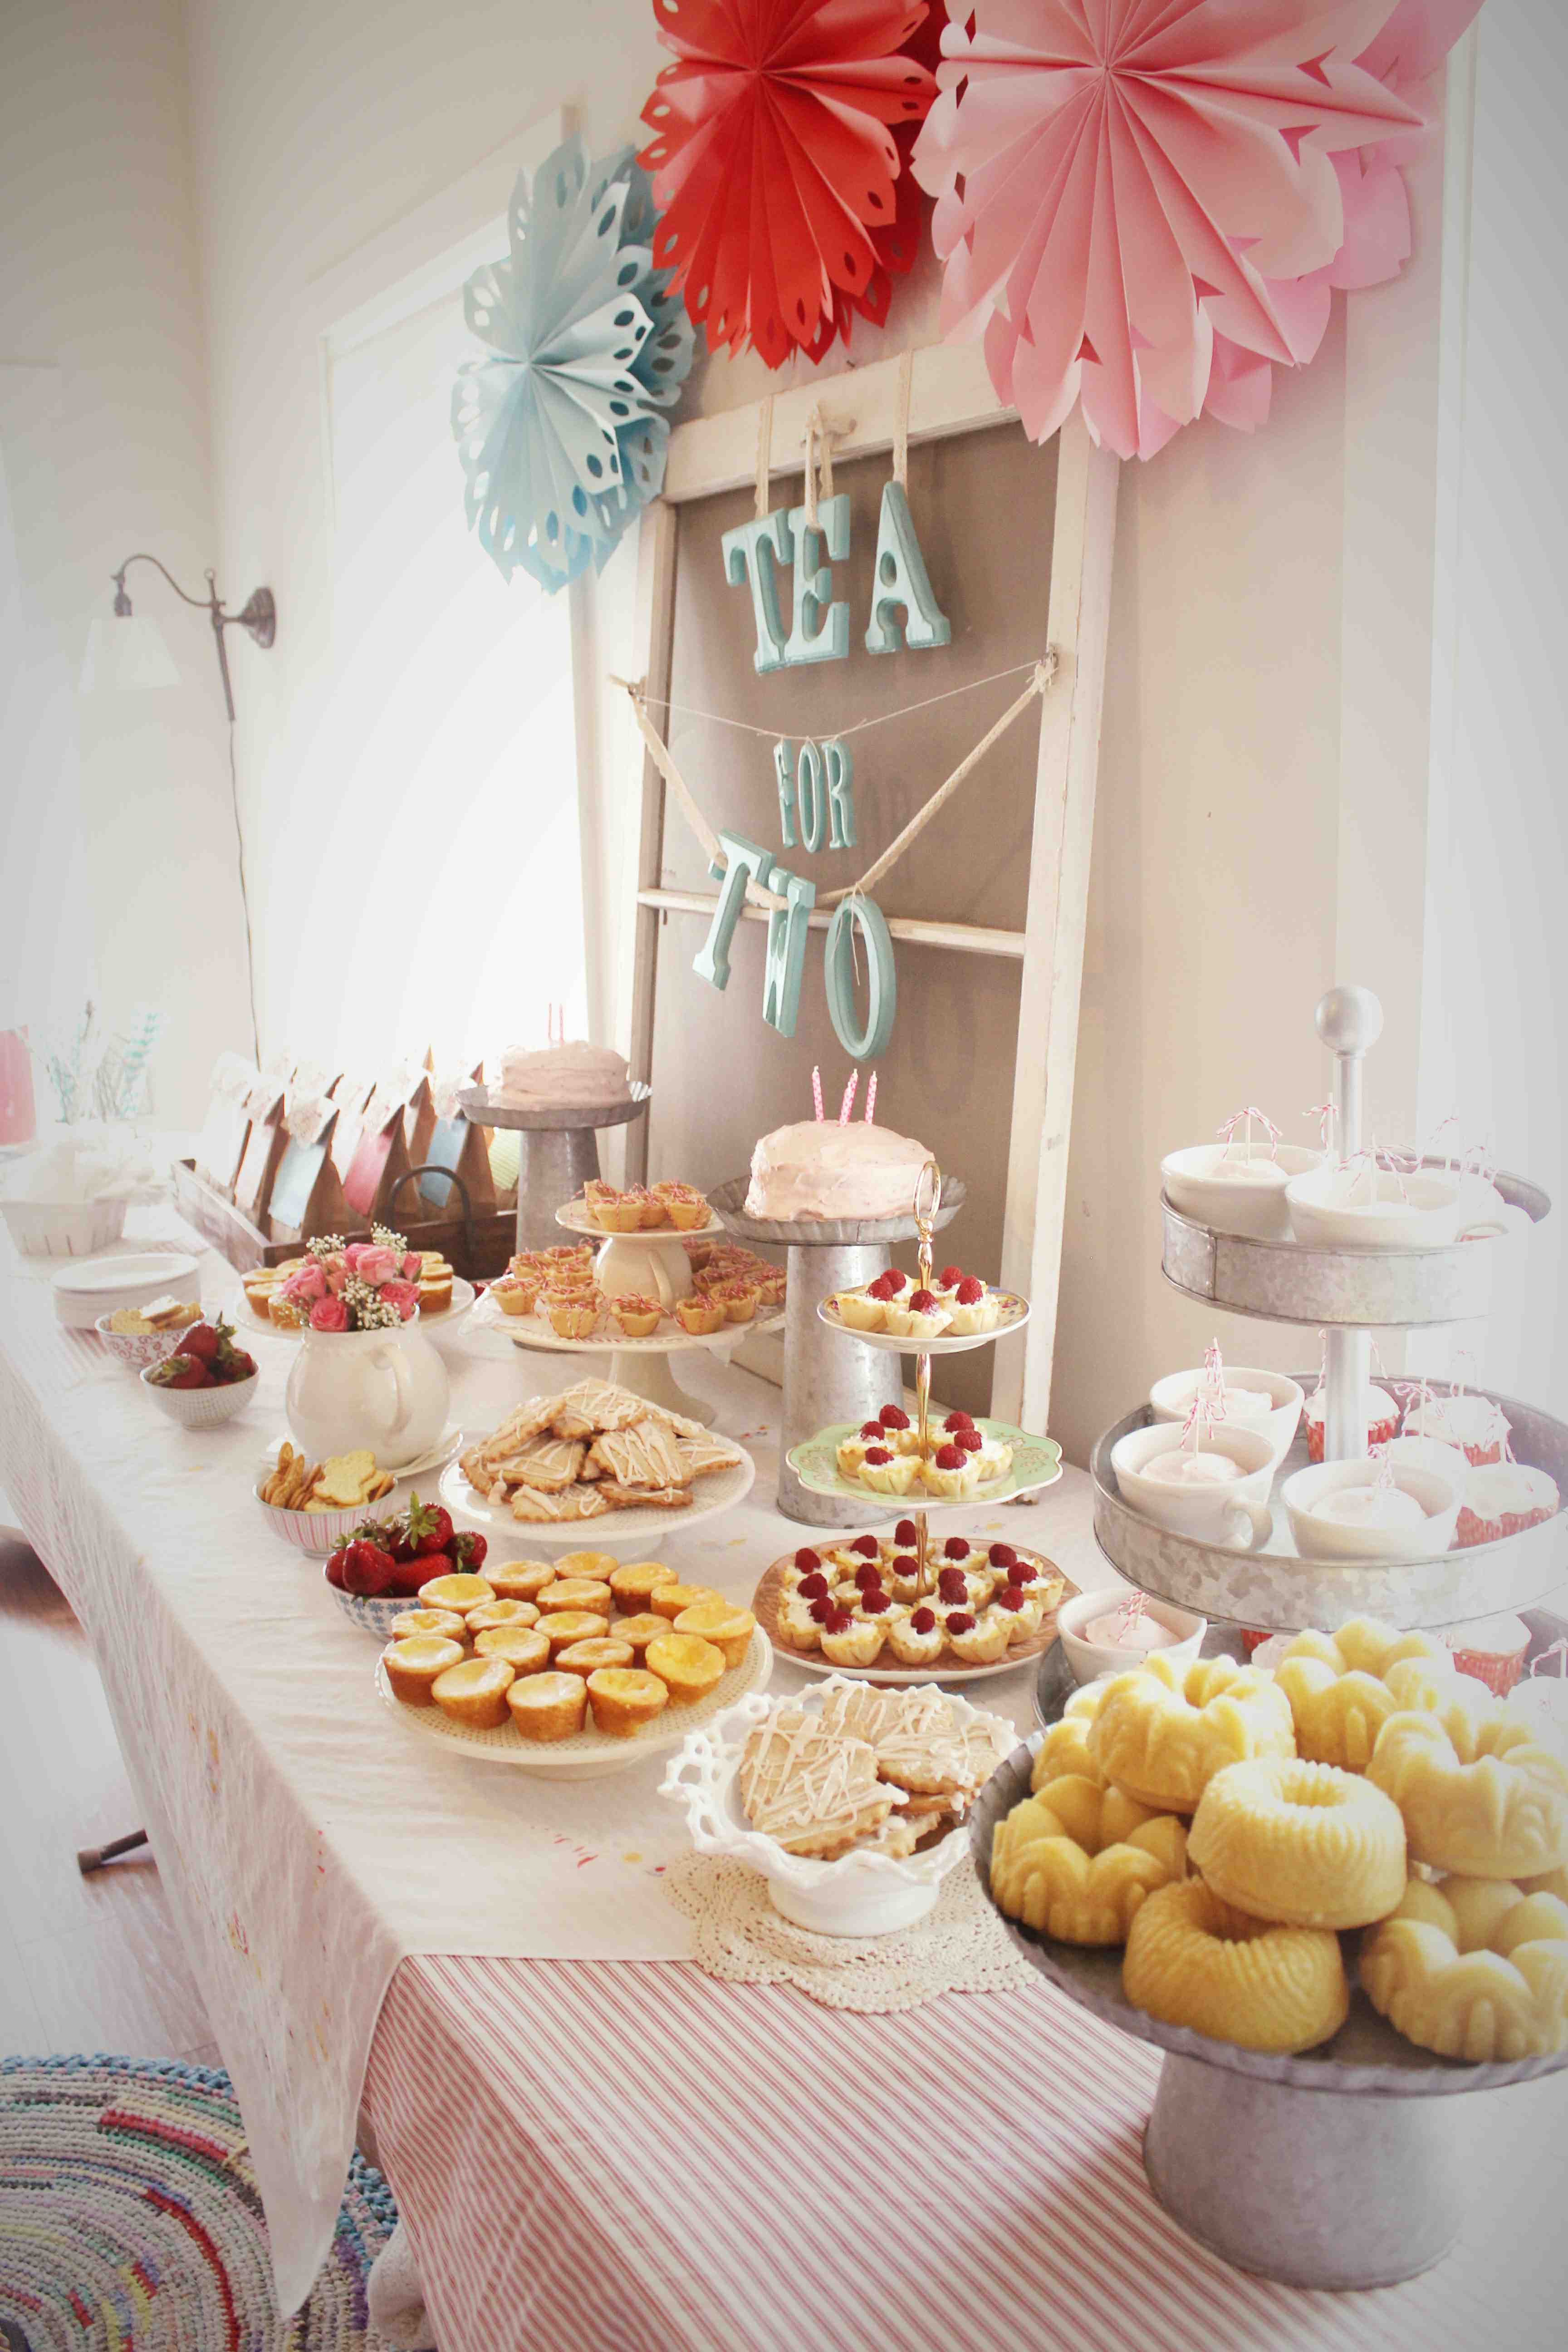 Tea Party Ideas For Girls
 A “Tea For Two” Birthday Party